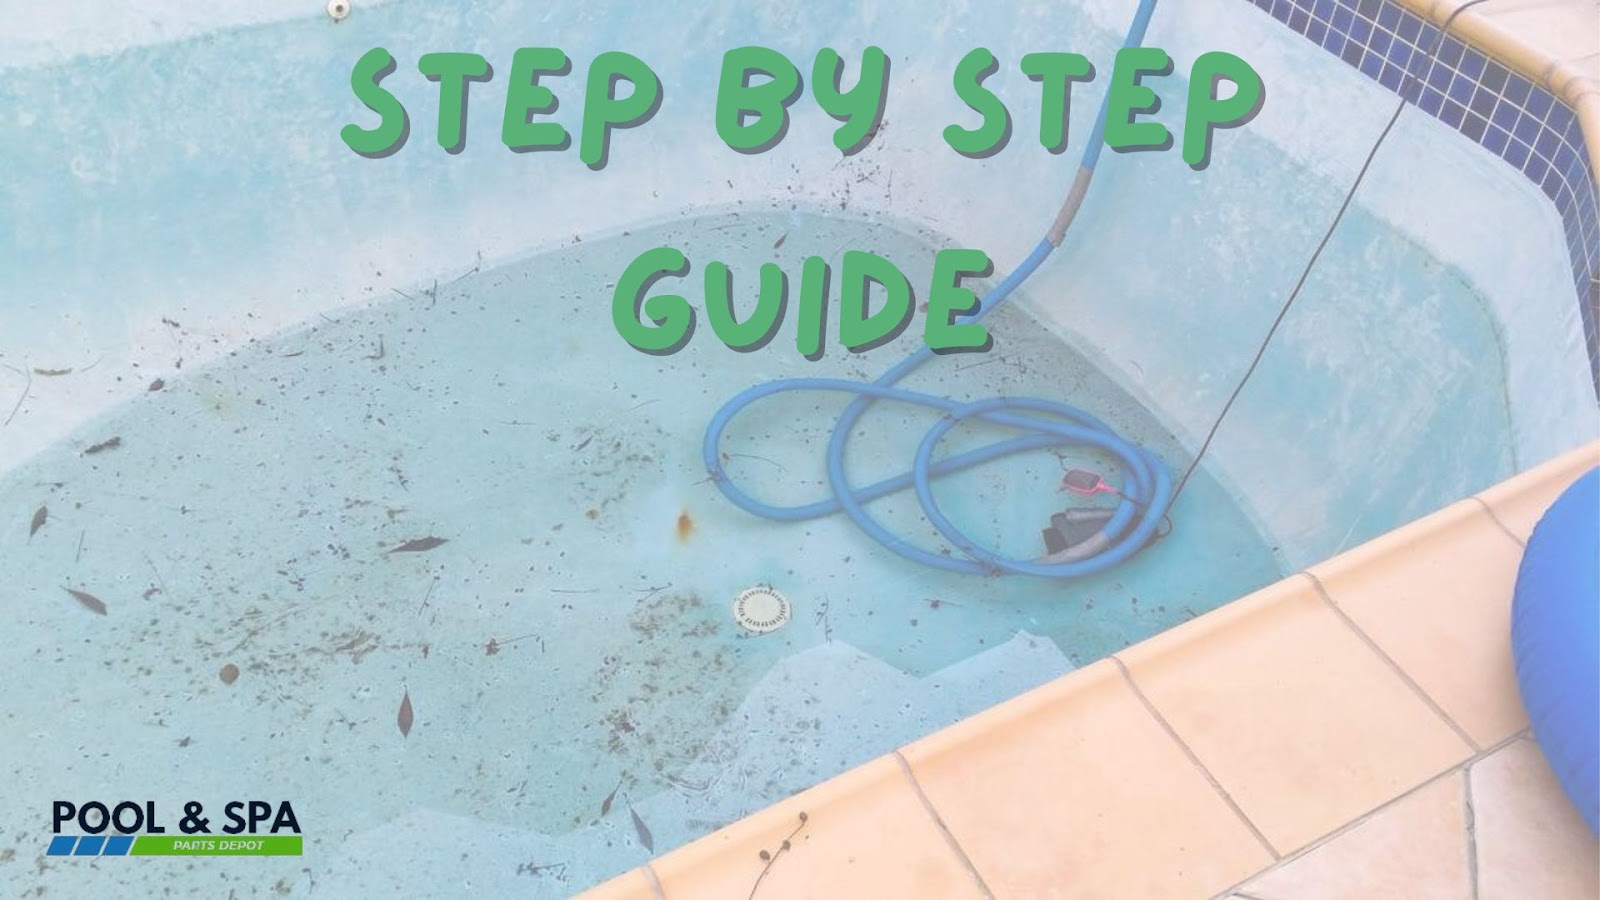 Step-by-Step Guide: How to Drain and Refill a Pool